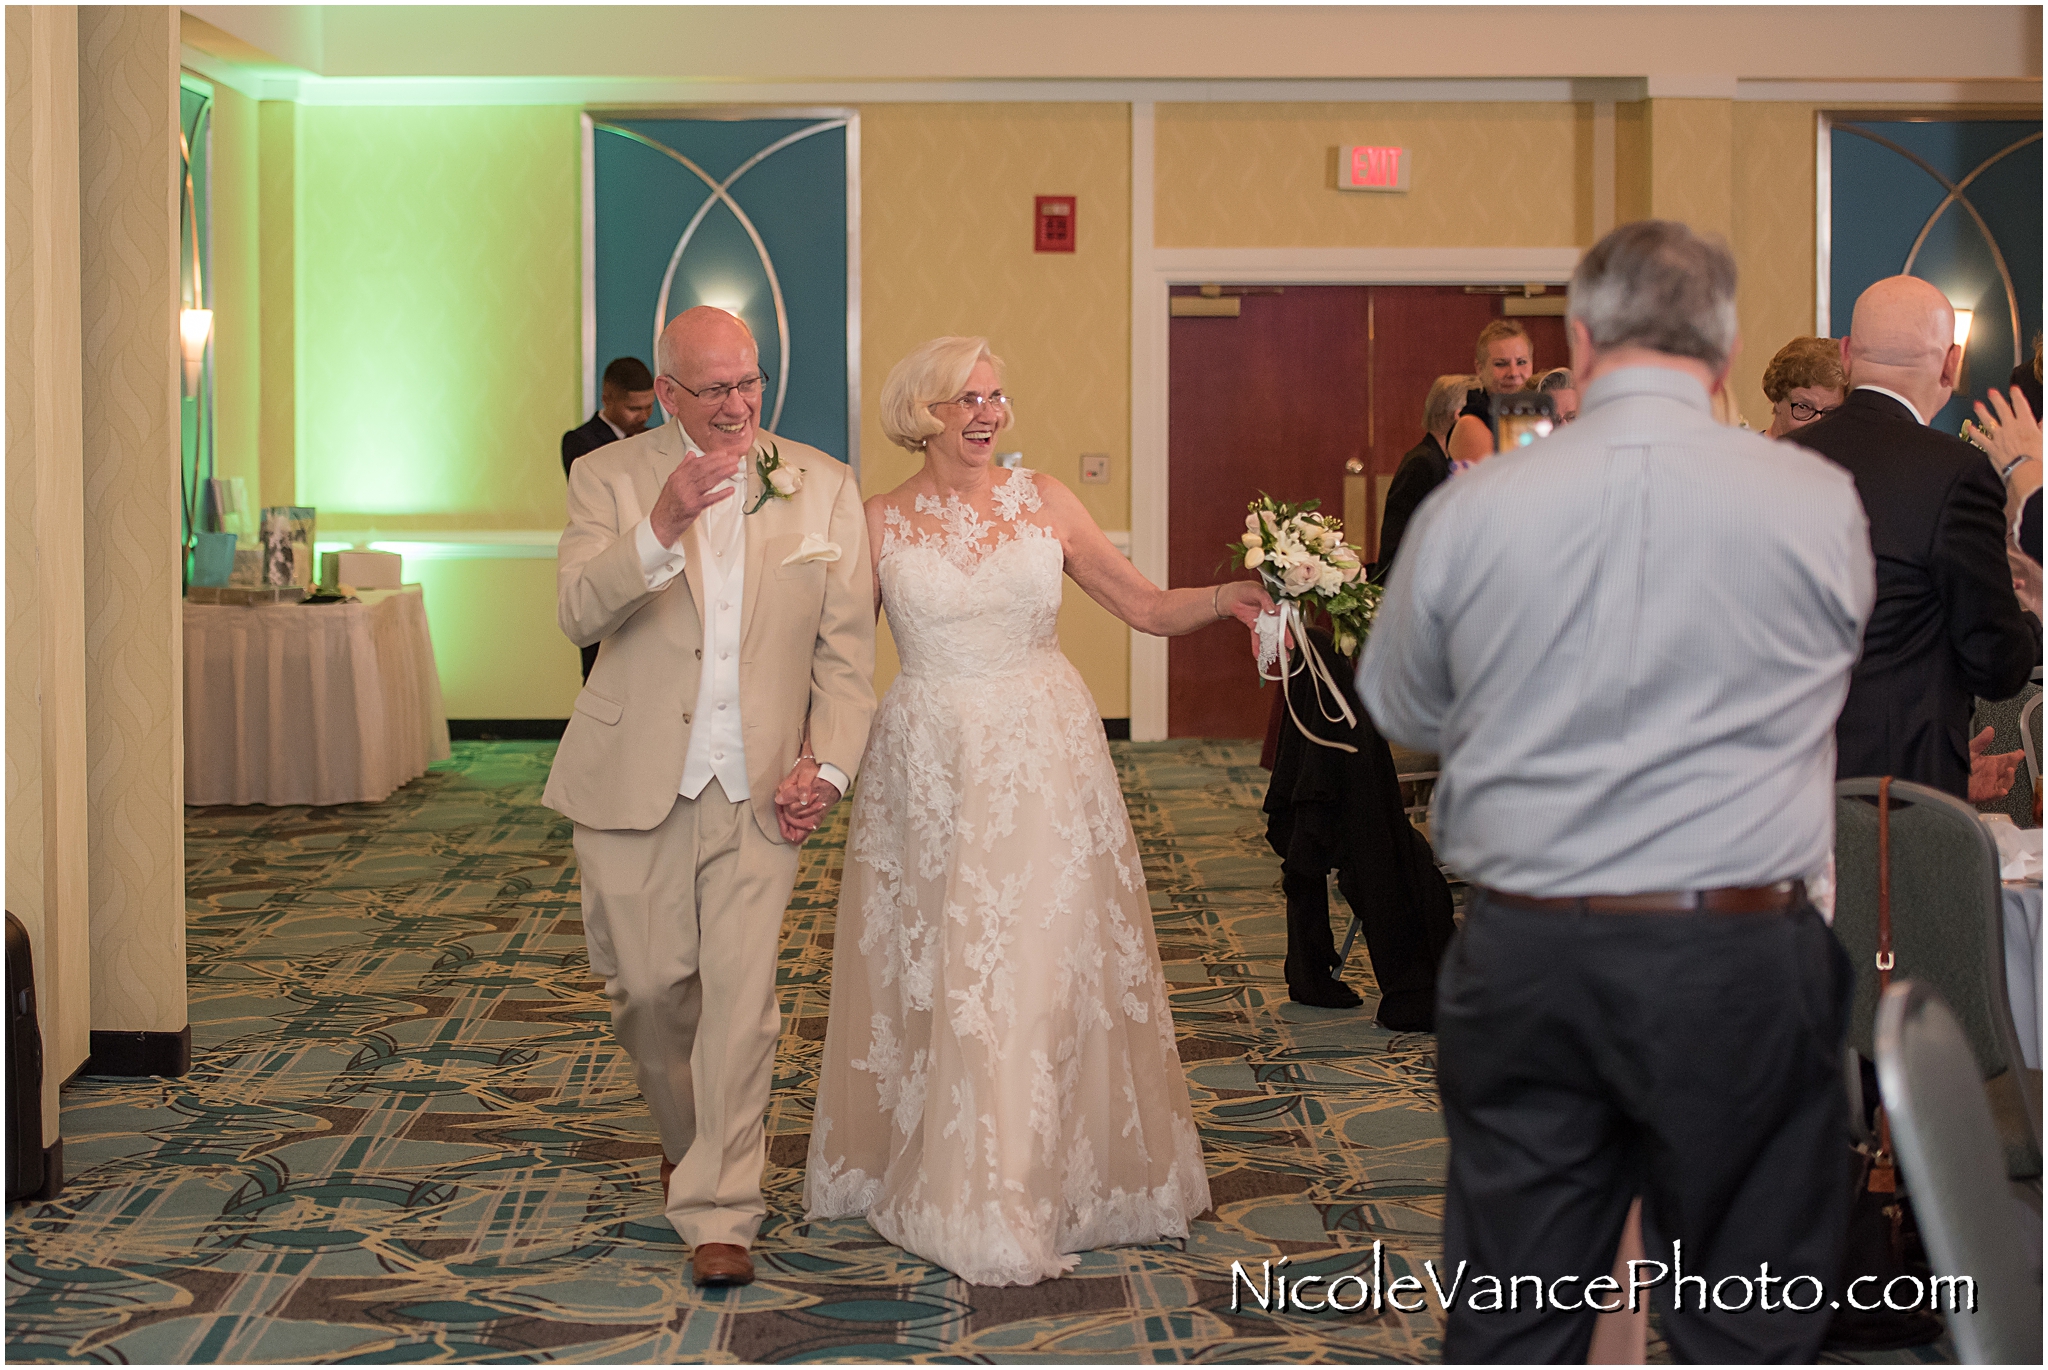 The bride and groom are announced into the ballroom at the Doubletree by Hilton Richmond-Midlothian.